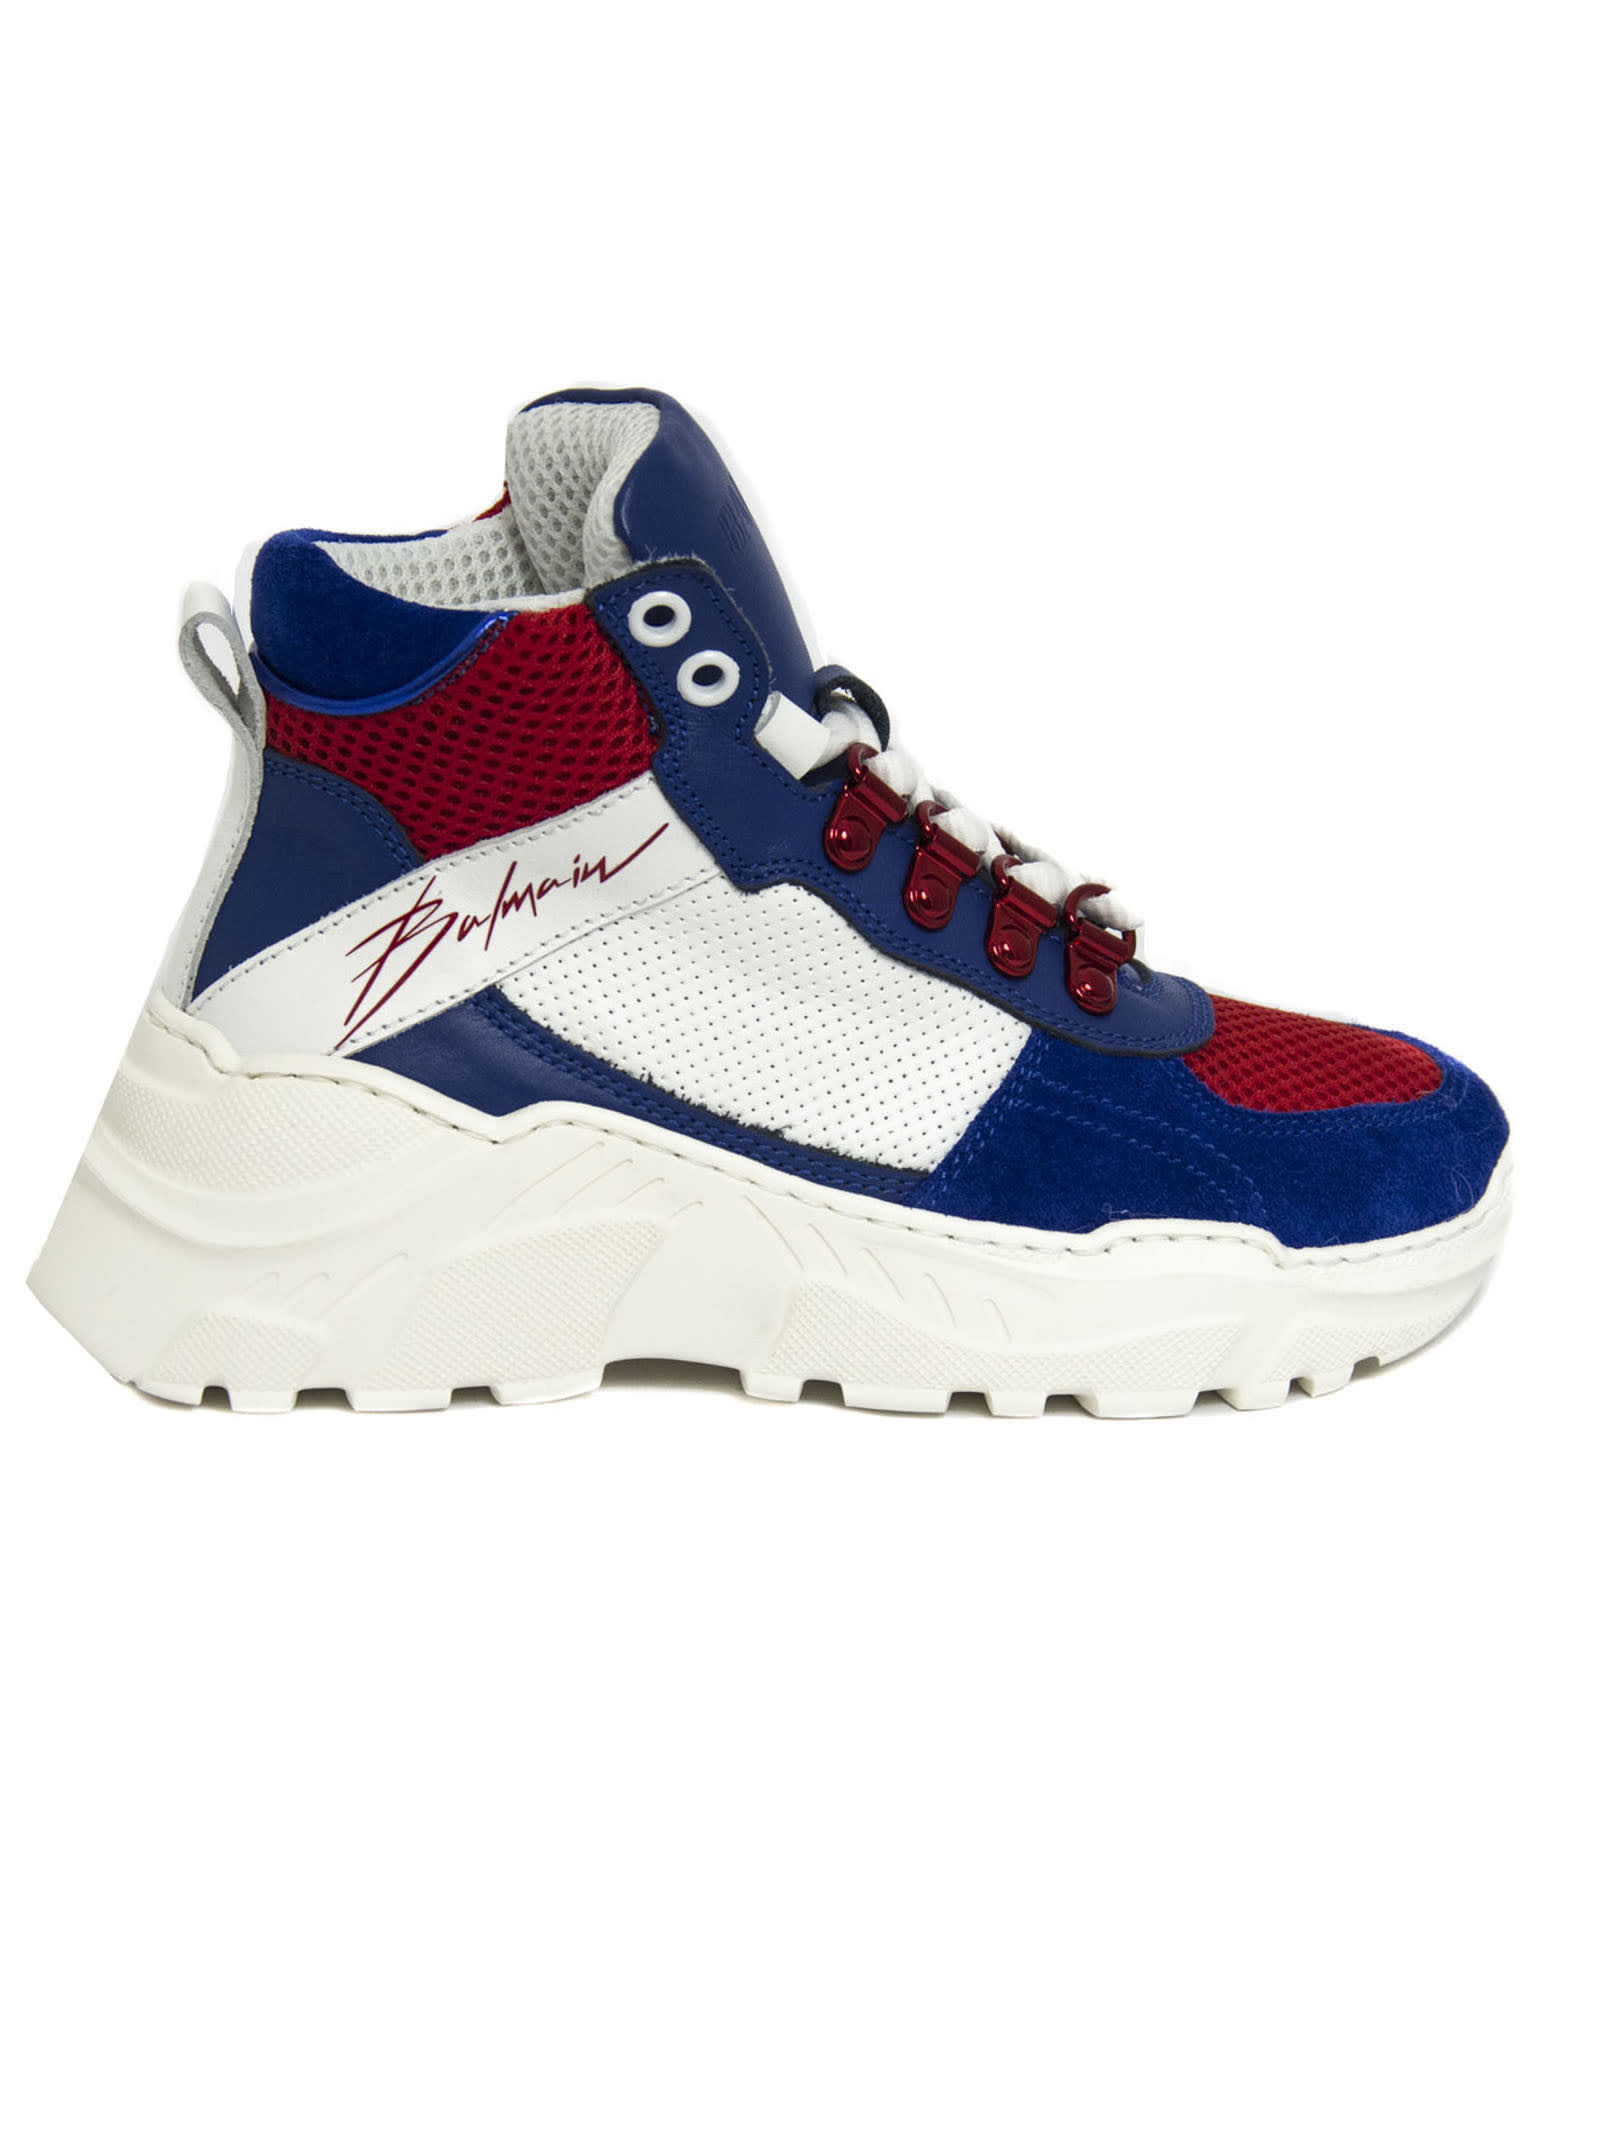 Balmain Blue, Red And White Suede And Leather Hi-top Sneaker